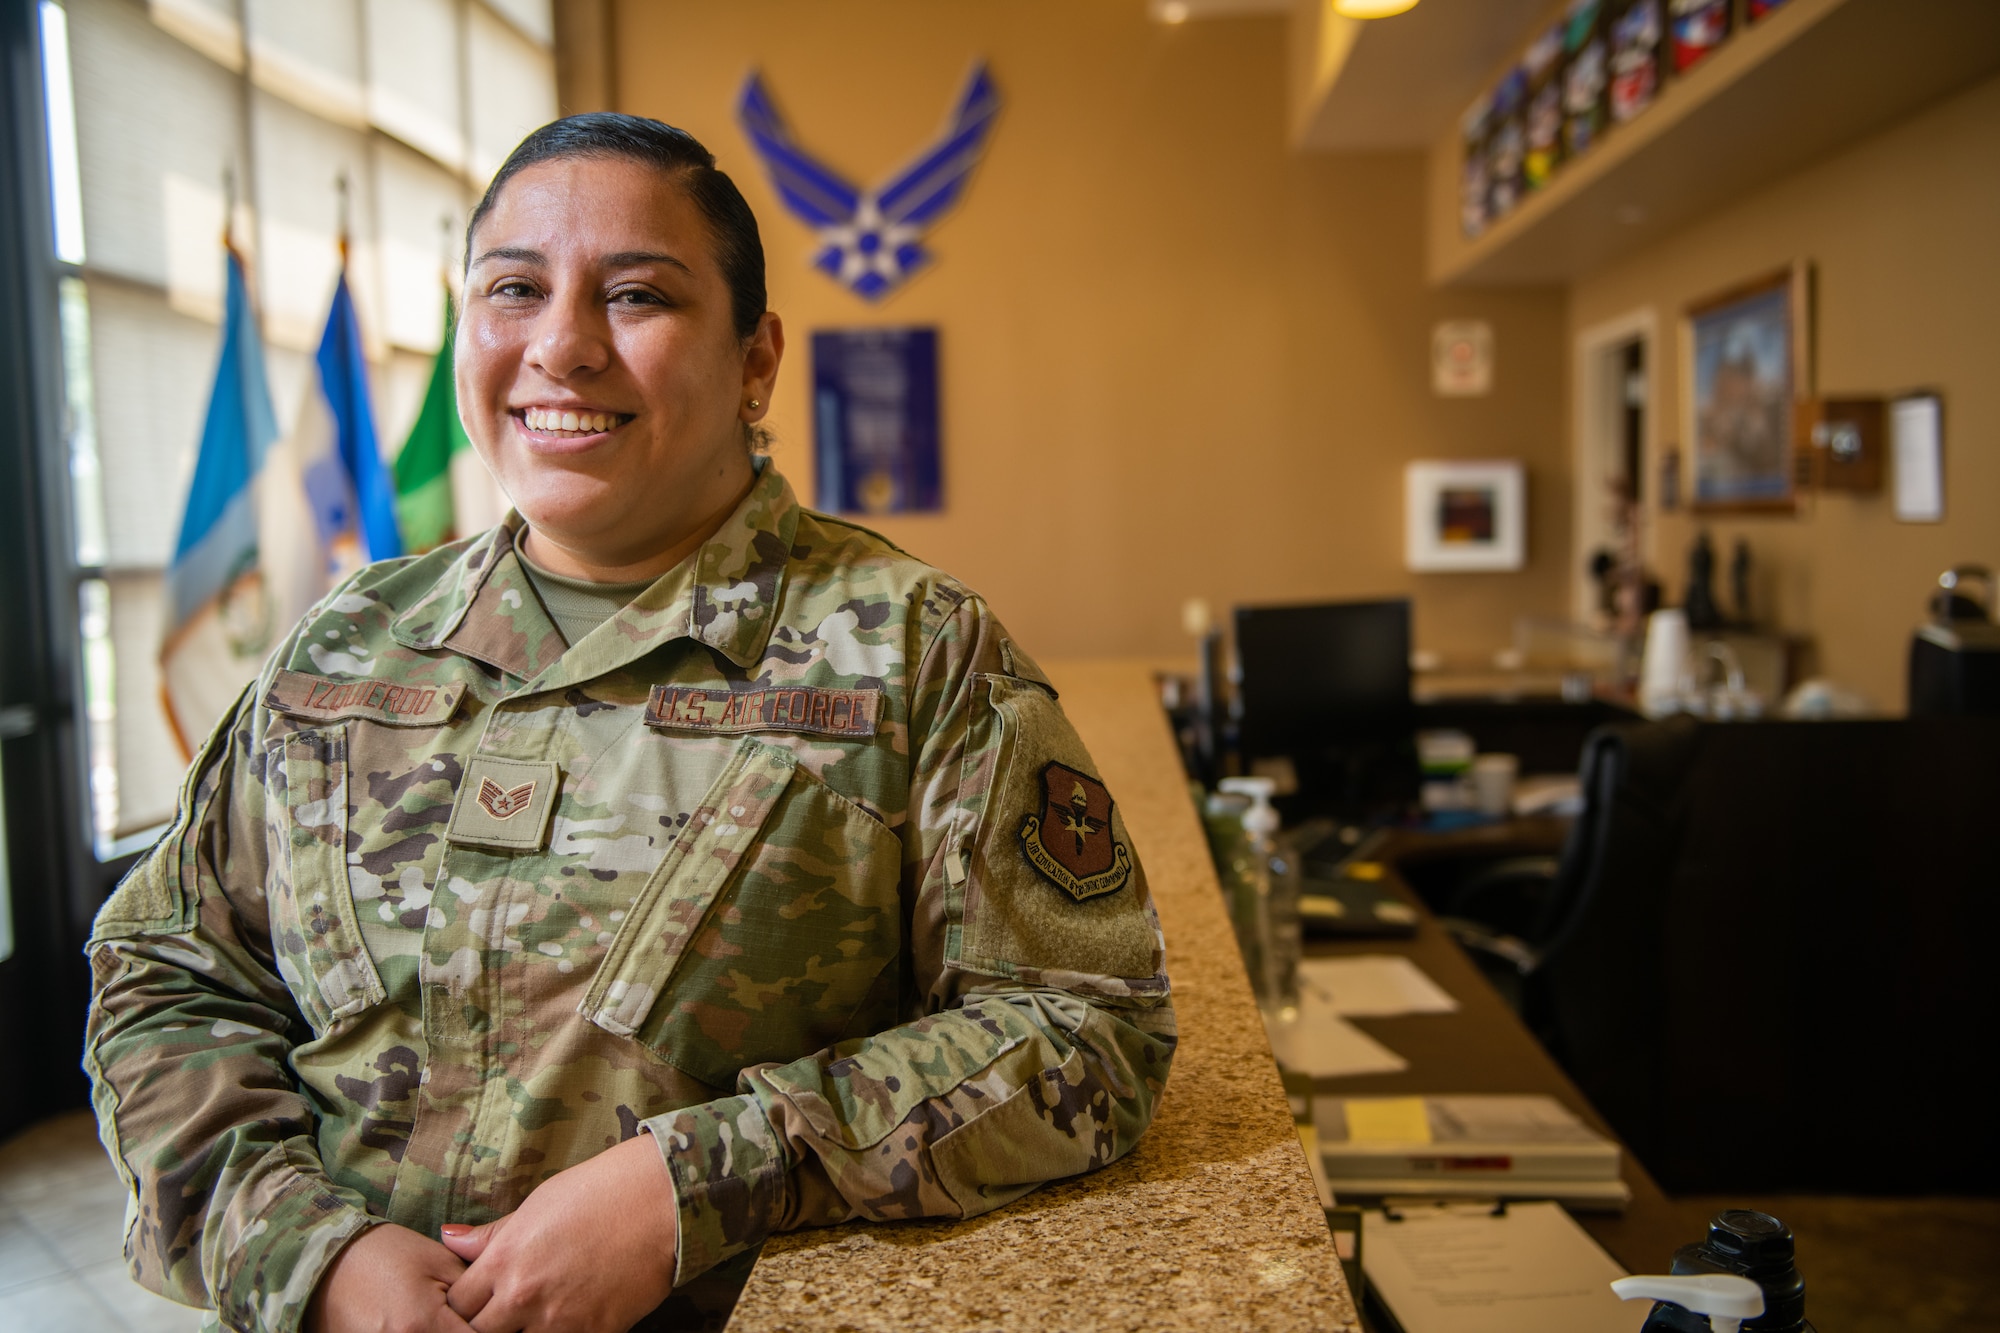 U.S. Air Force Staff Sgt. Soleine Izquierdo, Inter-American Air Forces Academy international student manager, pose for a photo Sept. 17, 2020, at Joint Base San Antonio-Lackland, Texas.